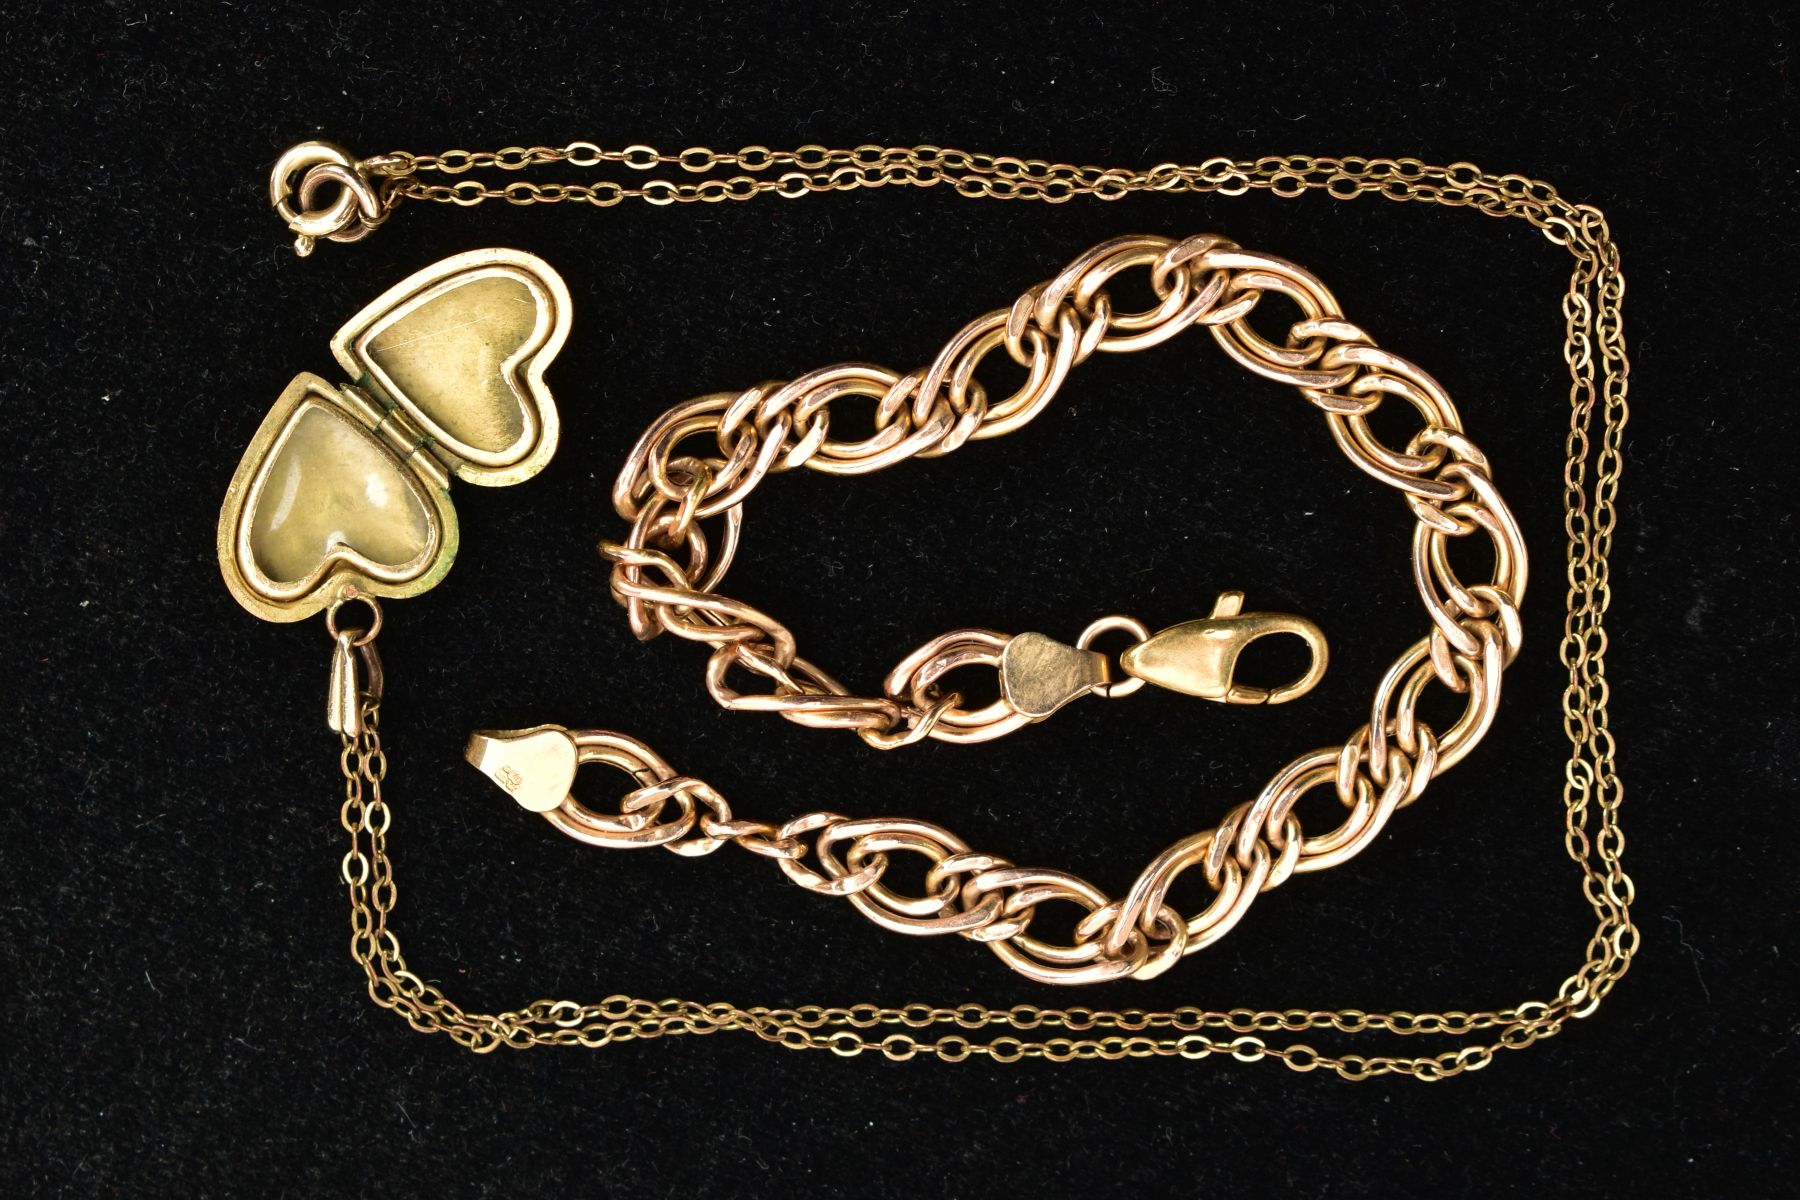 A 9CT GOLD BRACELET AND A HEART LOCKET PENDANT NECKLACE, the double curb link bracelet, fitted - Image 2 of 2